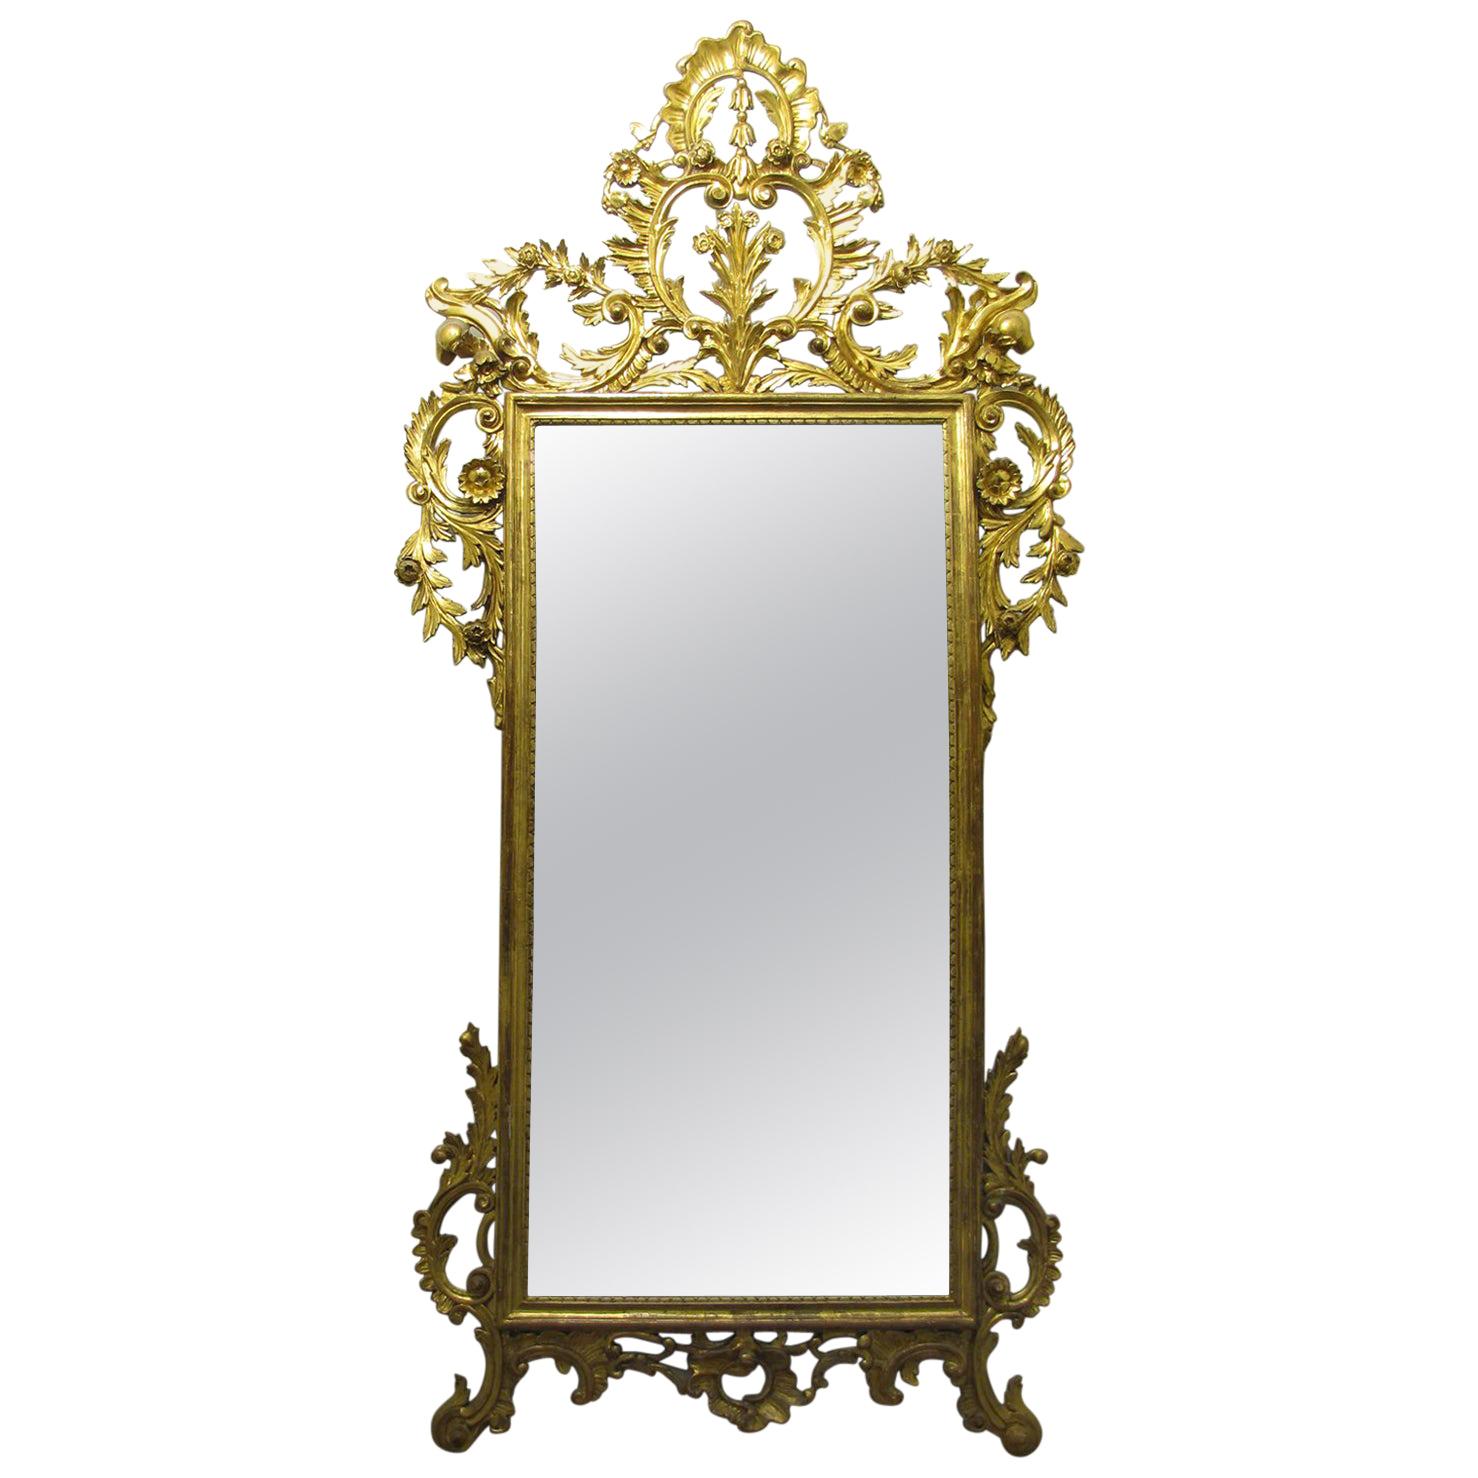 Tuscan Late 19th Century Louis XVI Mirror with a Carved and Gilt Wooden Frame For Sale